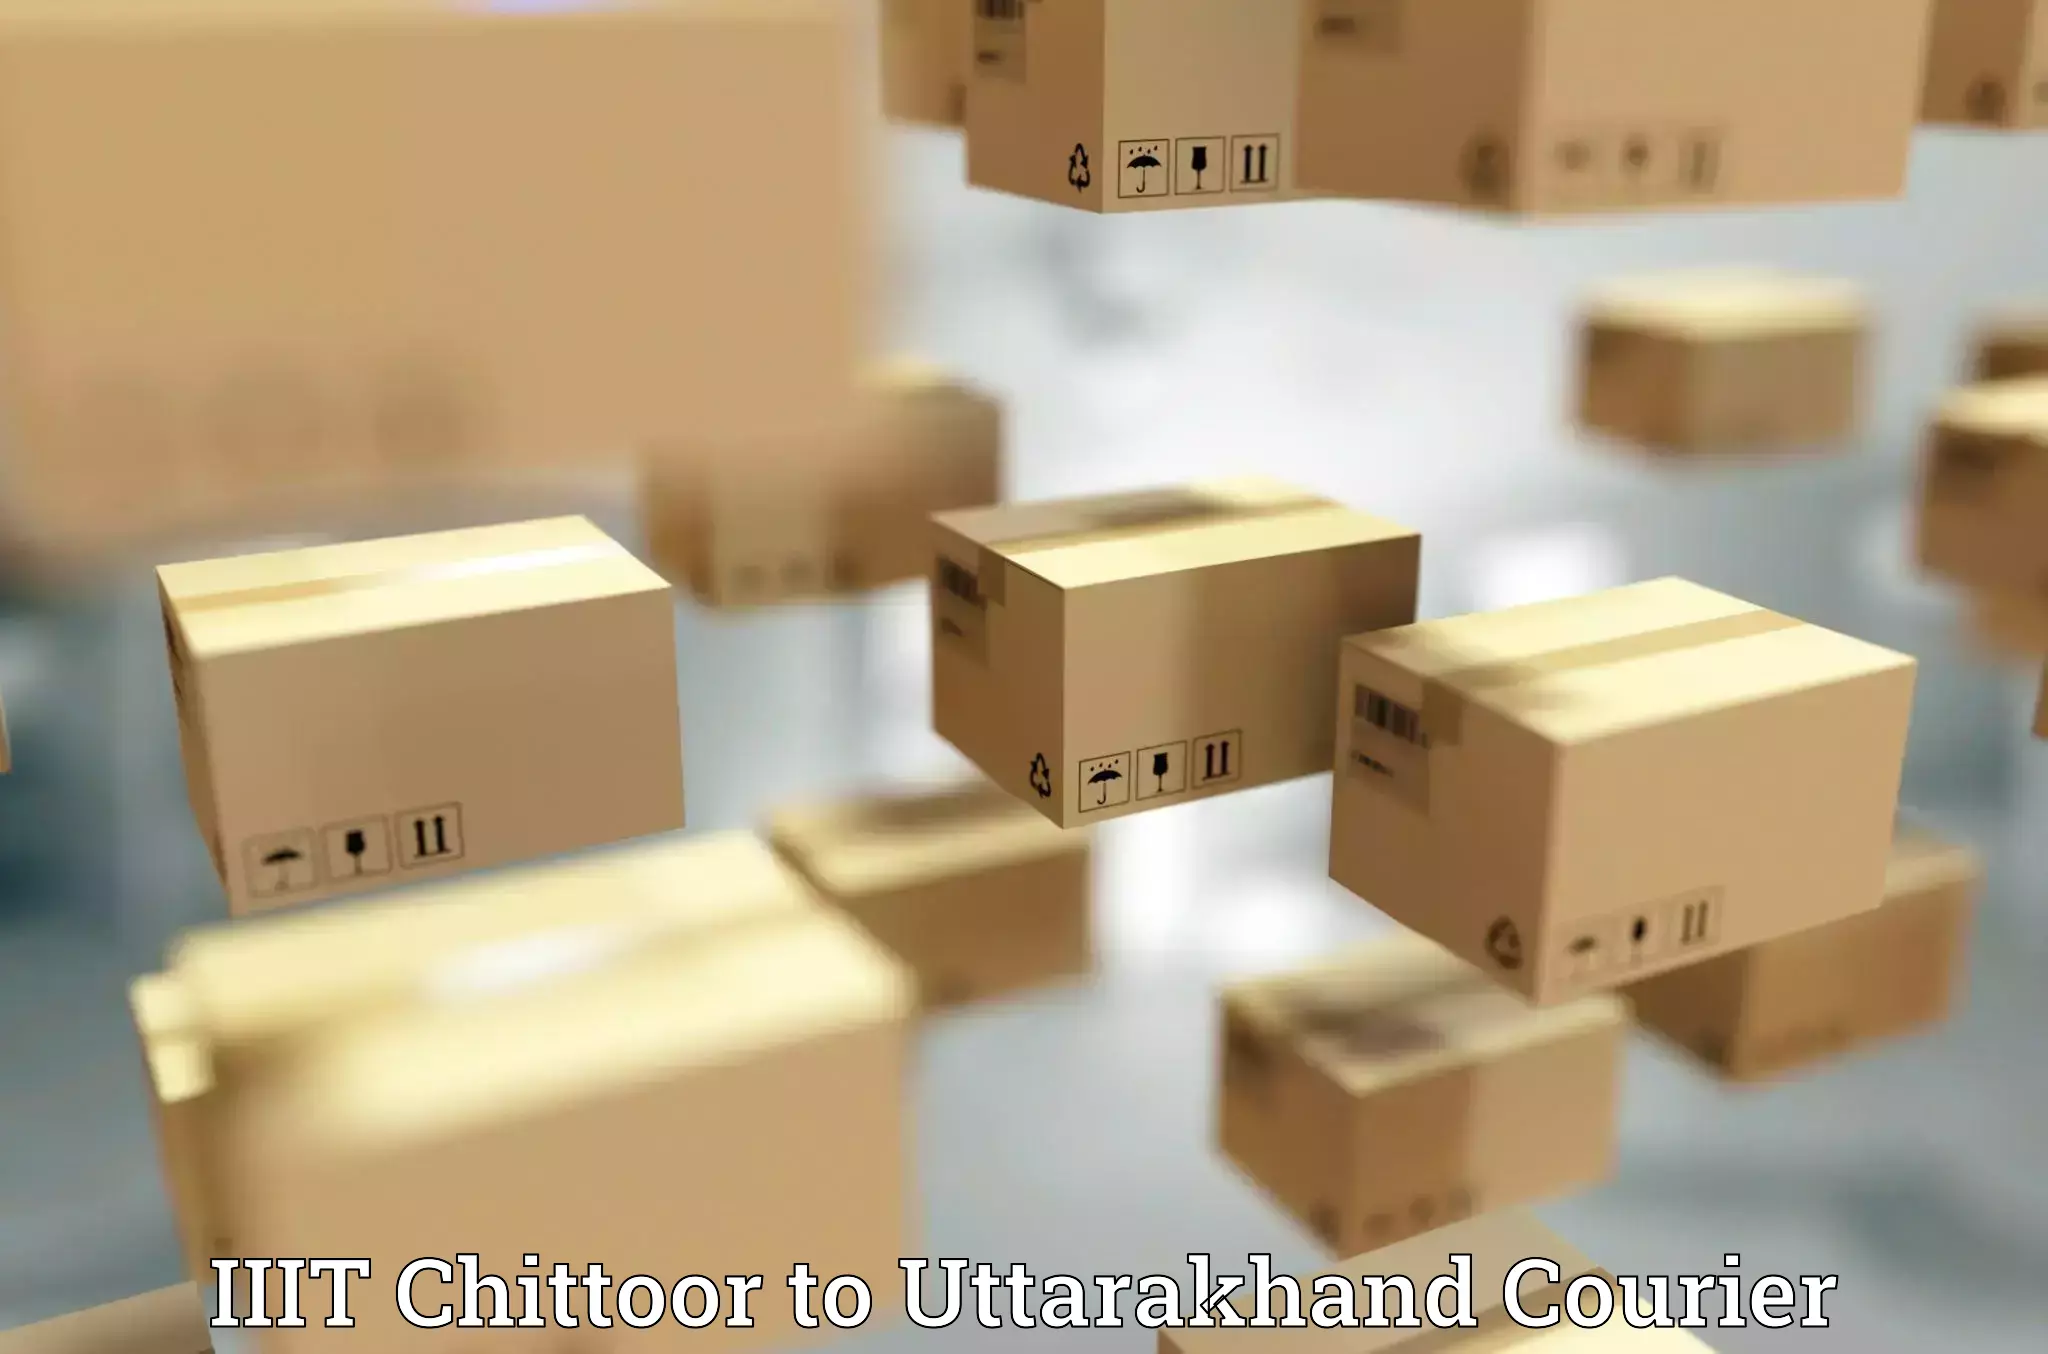 Full-service courier options IIIT Chittoor to Bhagwanpur